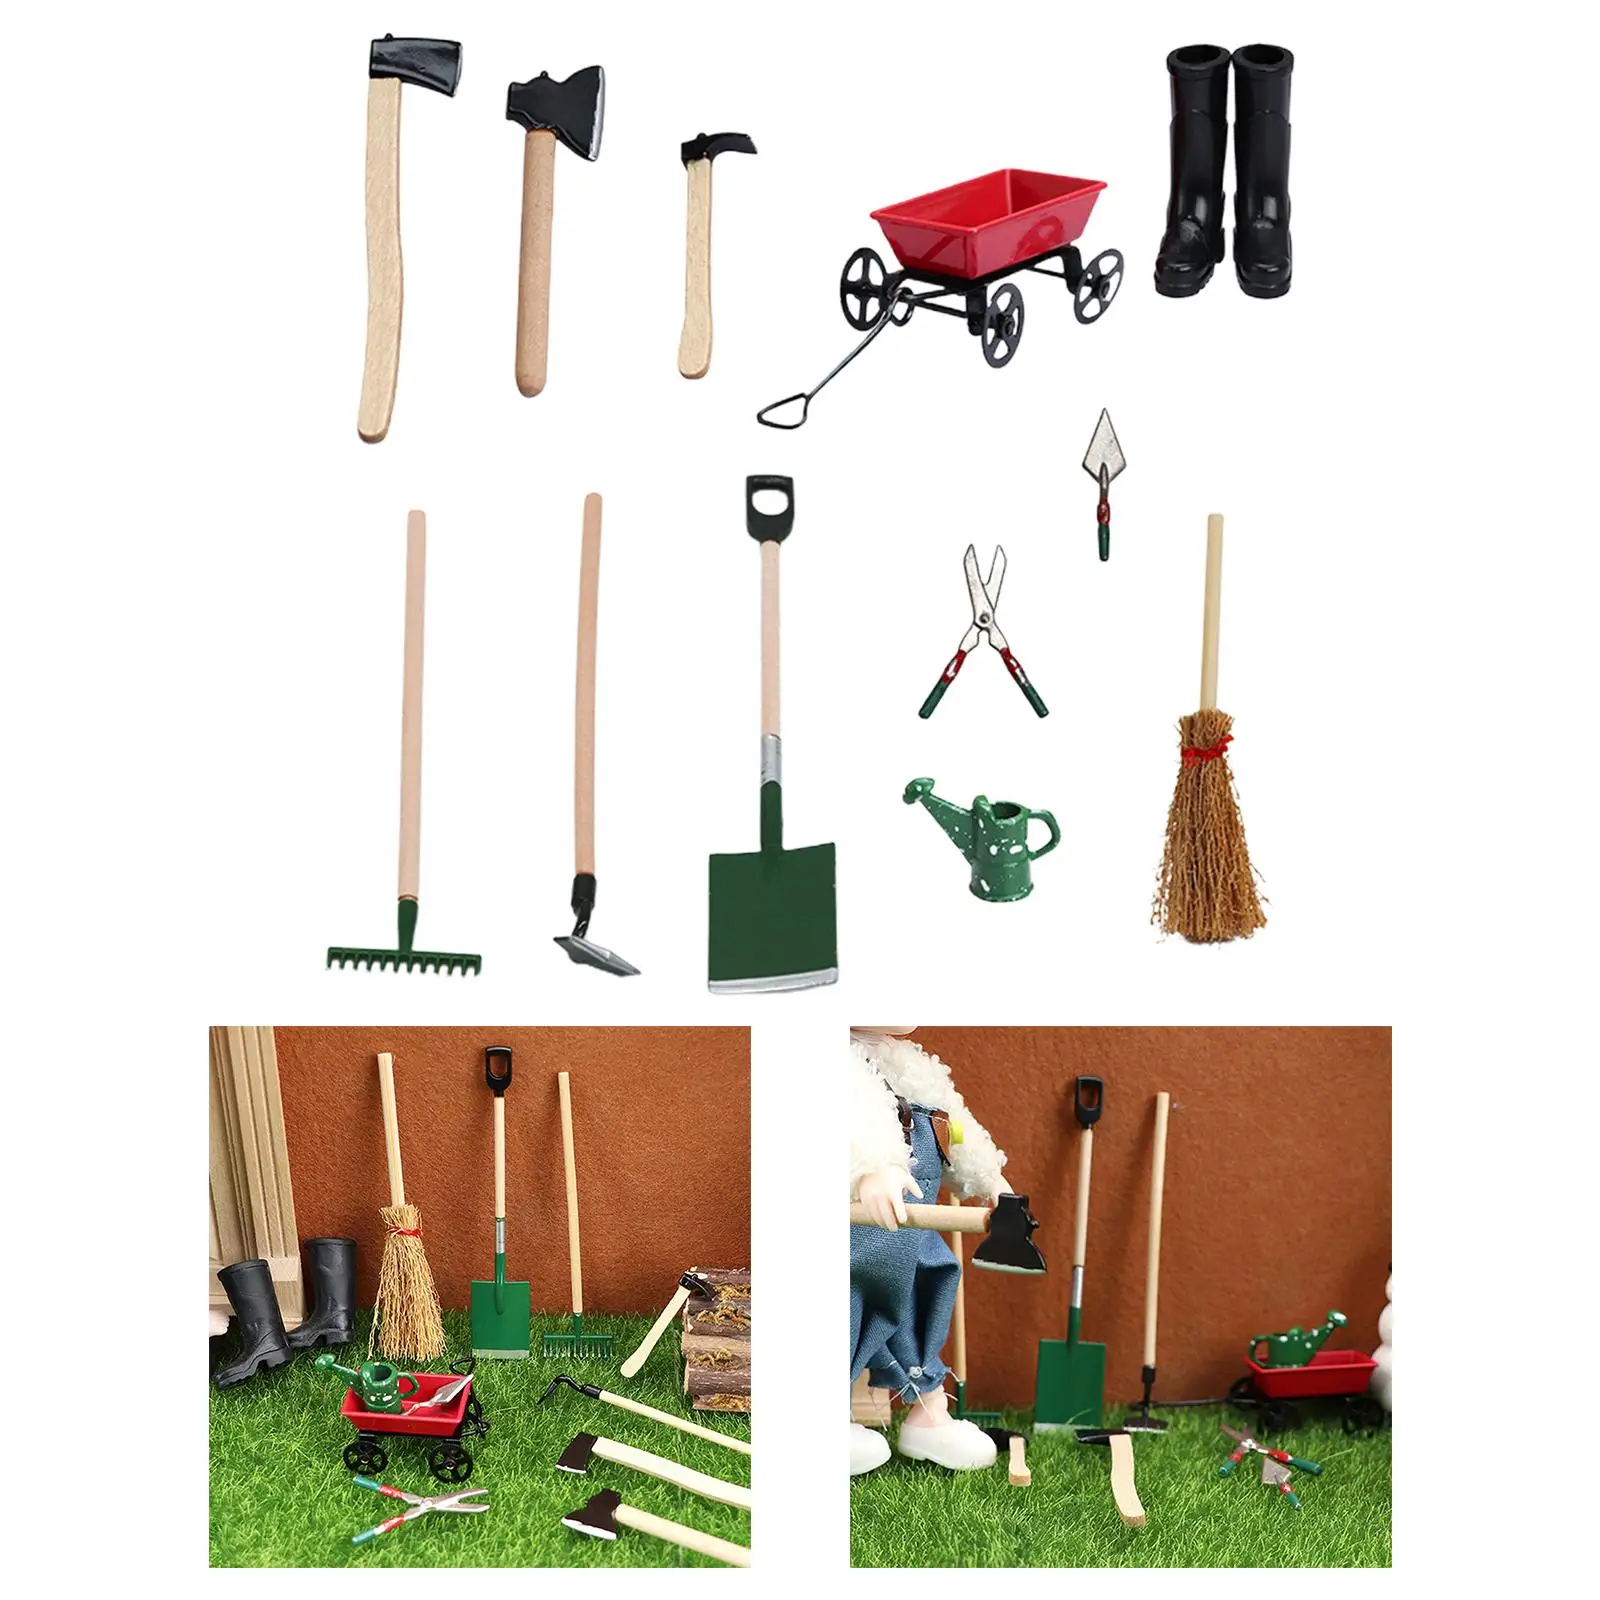 Miniature Garden Tools Pretend Play Ornament for Educational Toy Gardening